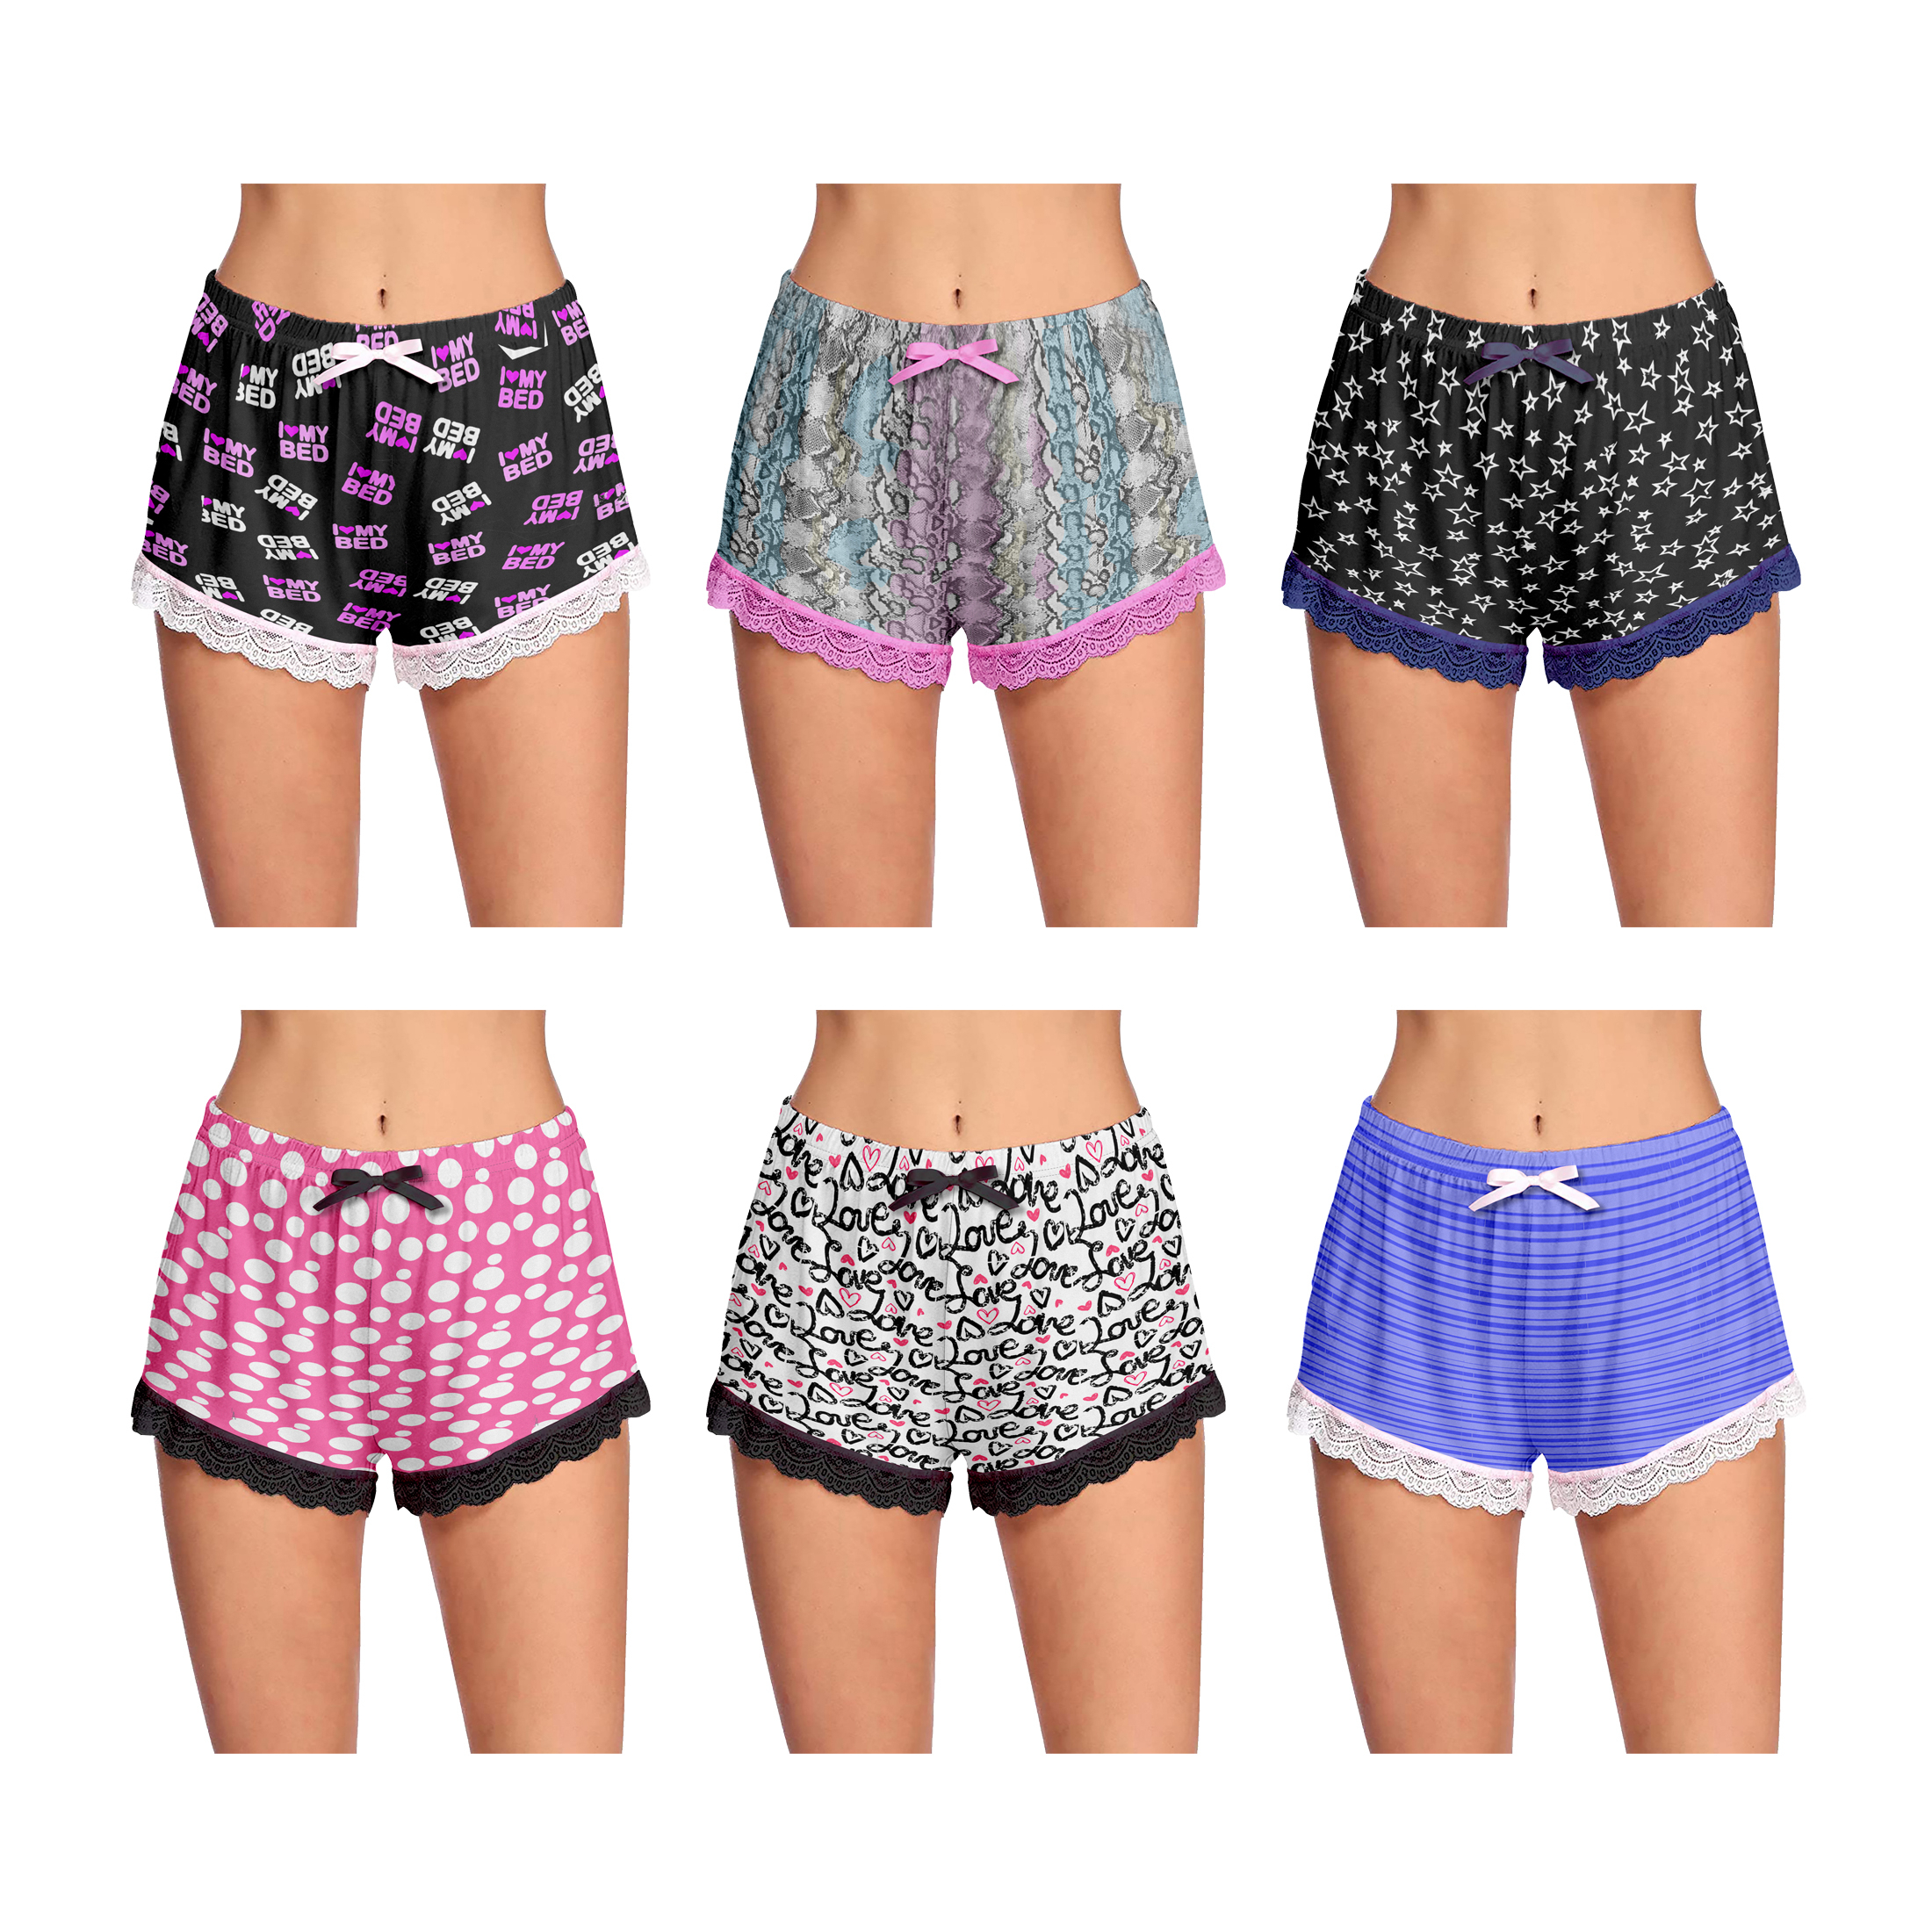 6-Pack Women's Casual Pajama Shorts Stretchy Laced Hem Relaxed Fit Yoga Printed Ladies Bottom - M